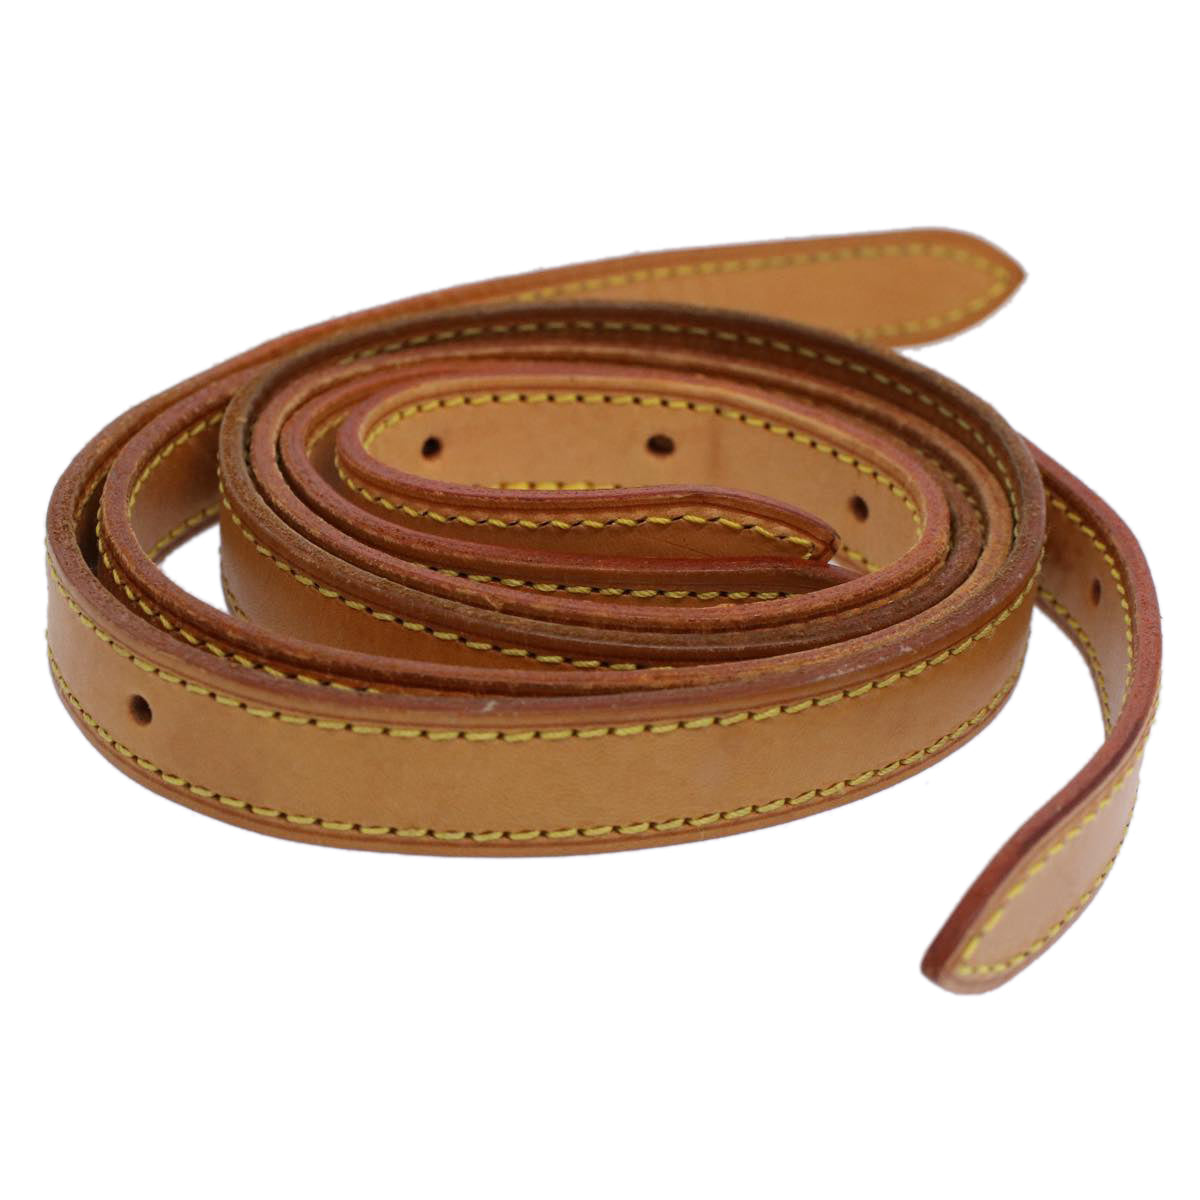 LOUIS VUITTON Shoulder Strap Bucket for GM Leather 21.7""-27.6"" LV Auth bs9317